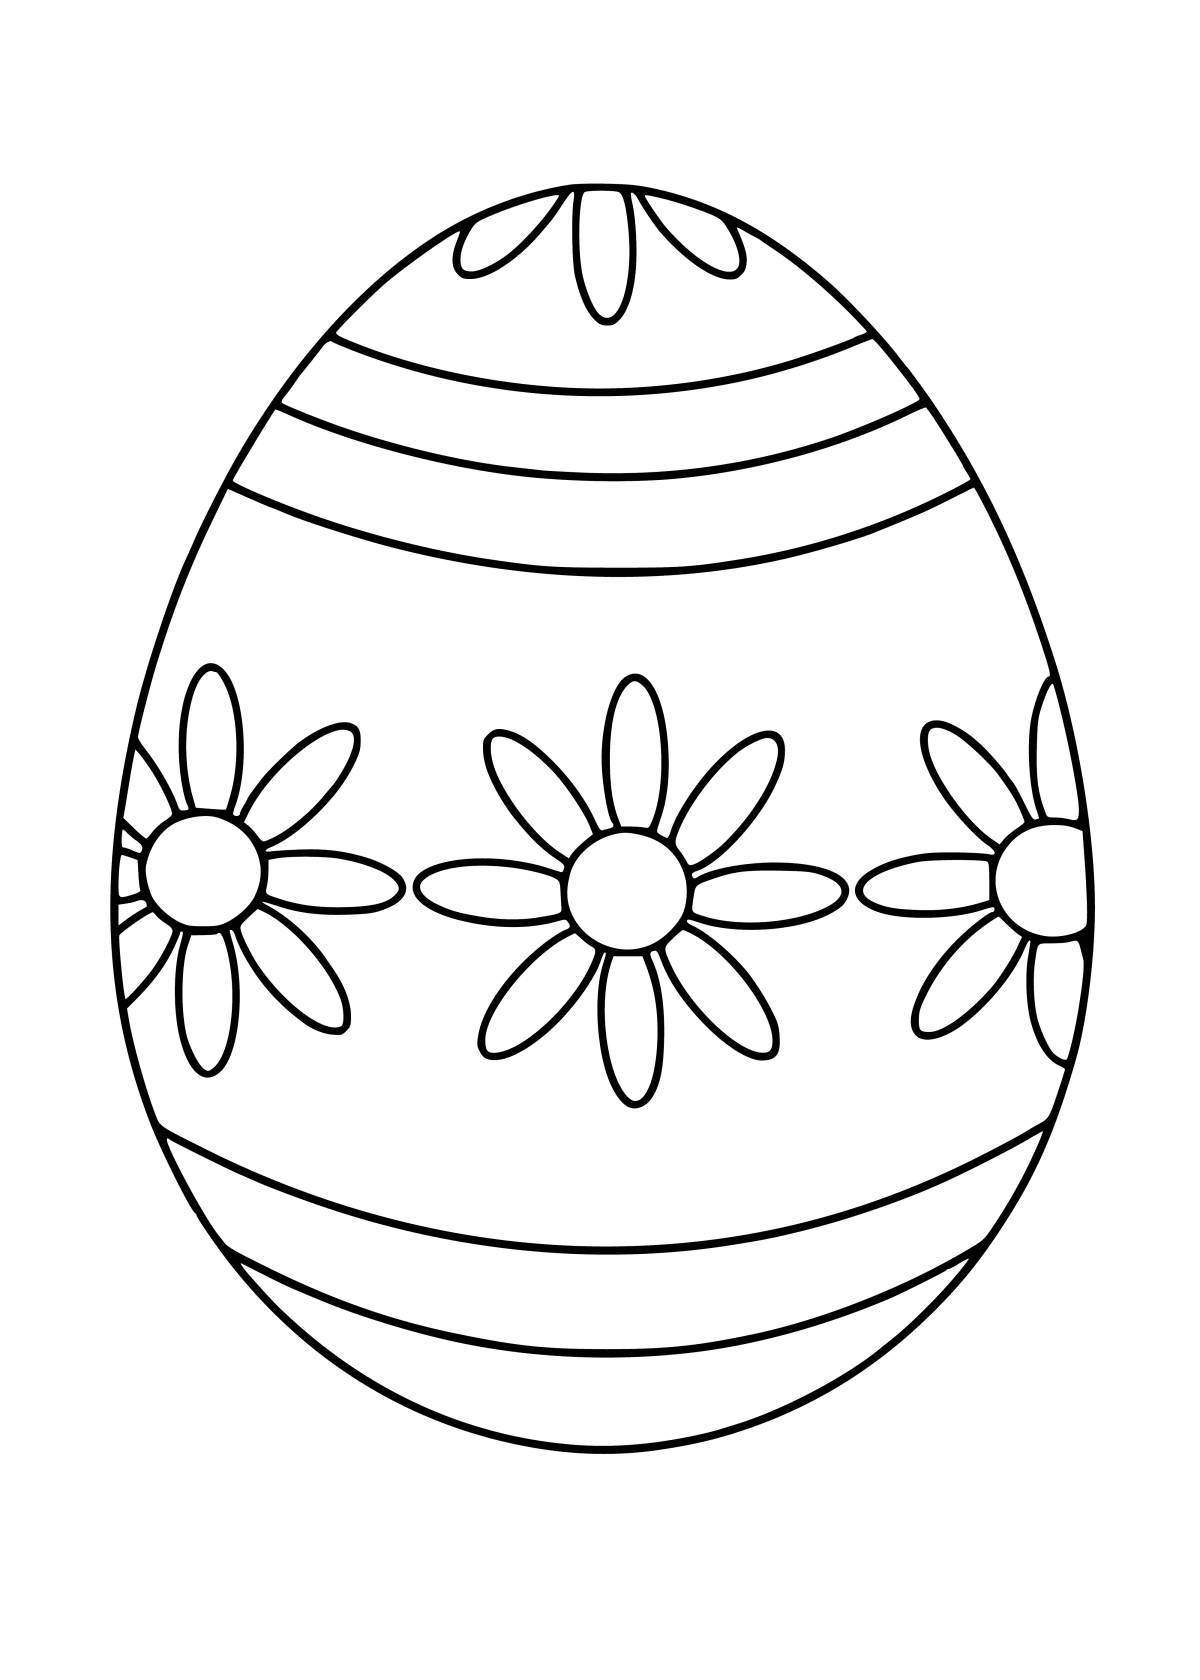 Colorful egg coloring page for kids